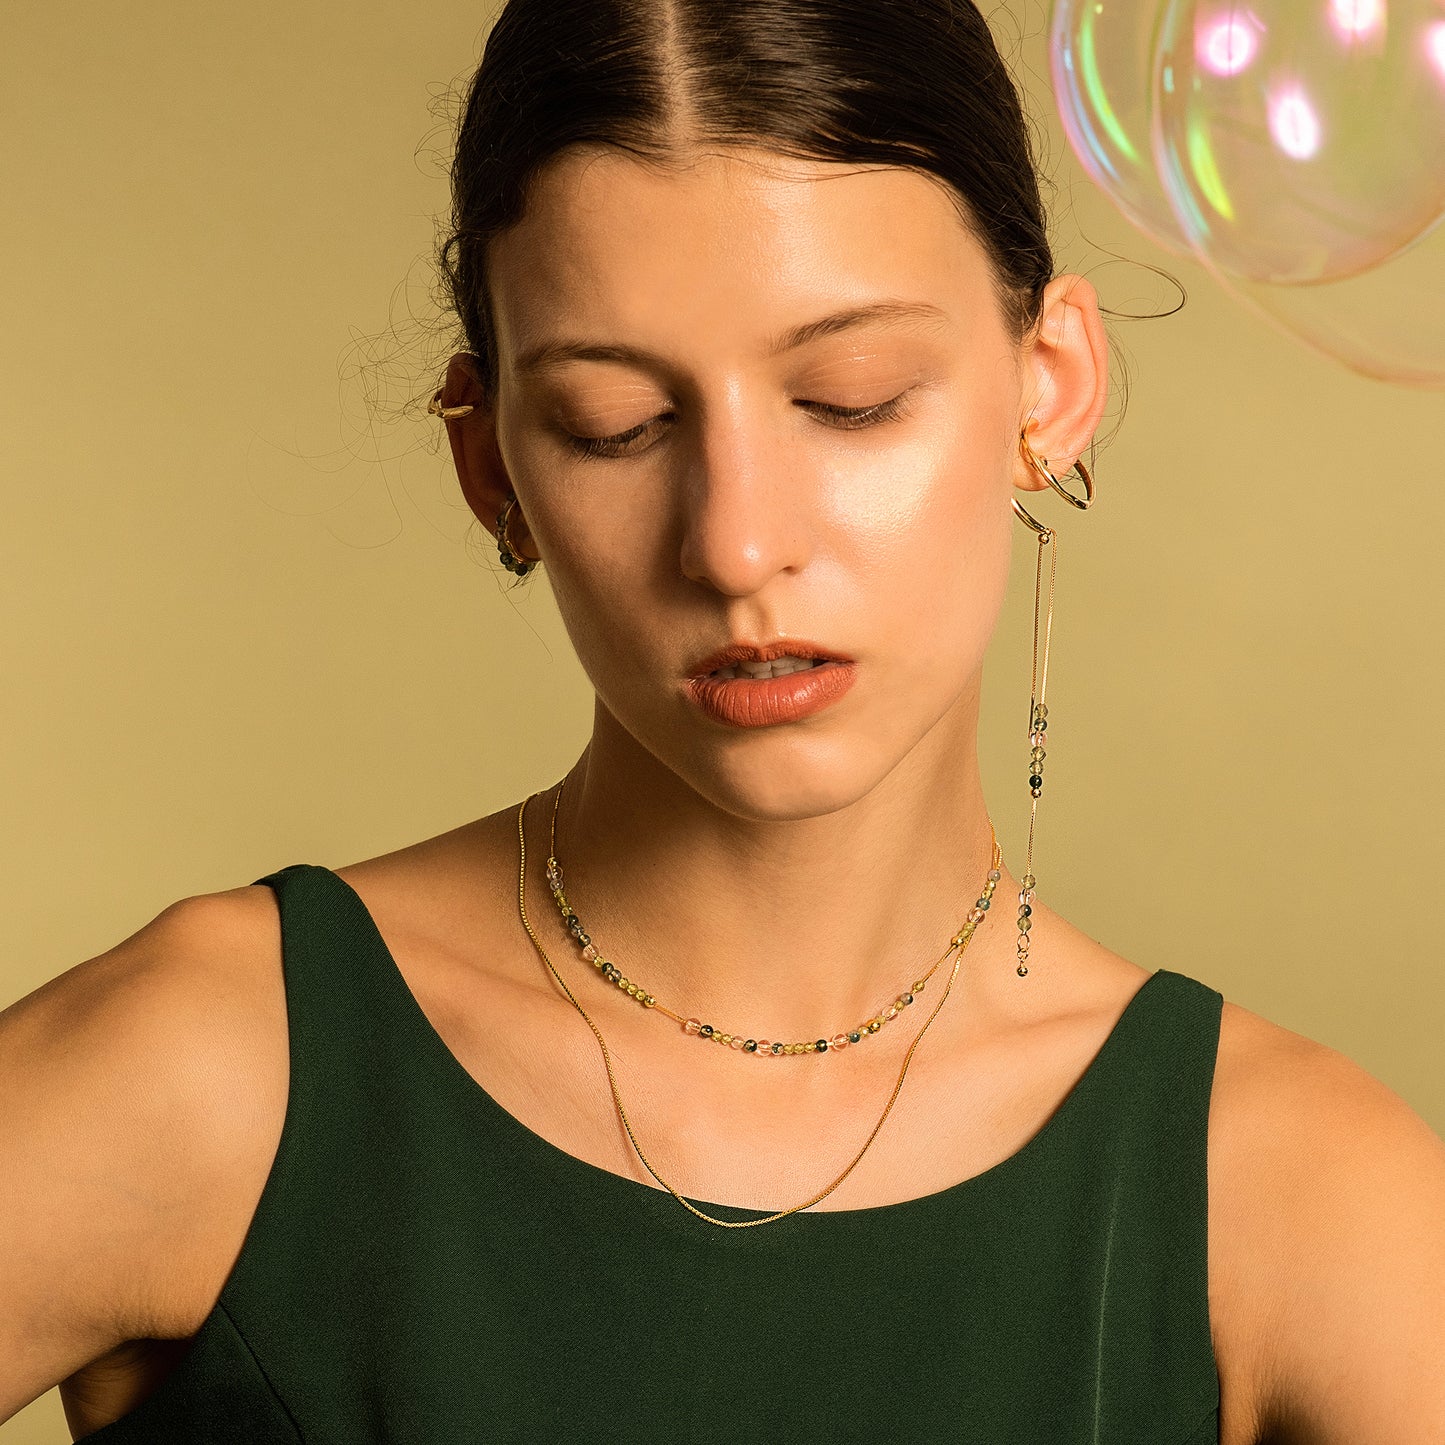 Bubble Nebula-Double Hoop Ear Cuff+Beading Threader Earring (Gold Plated)